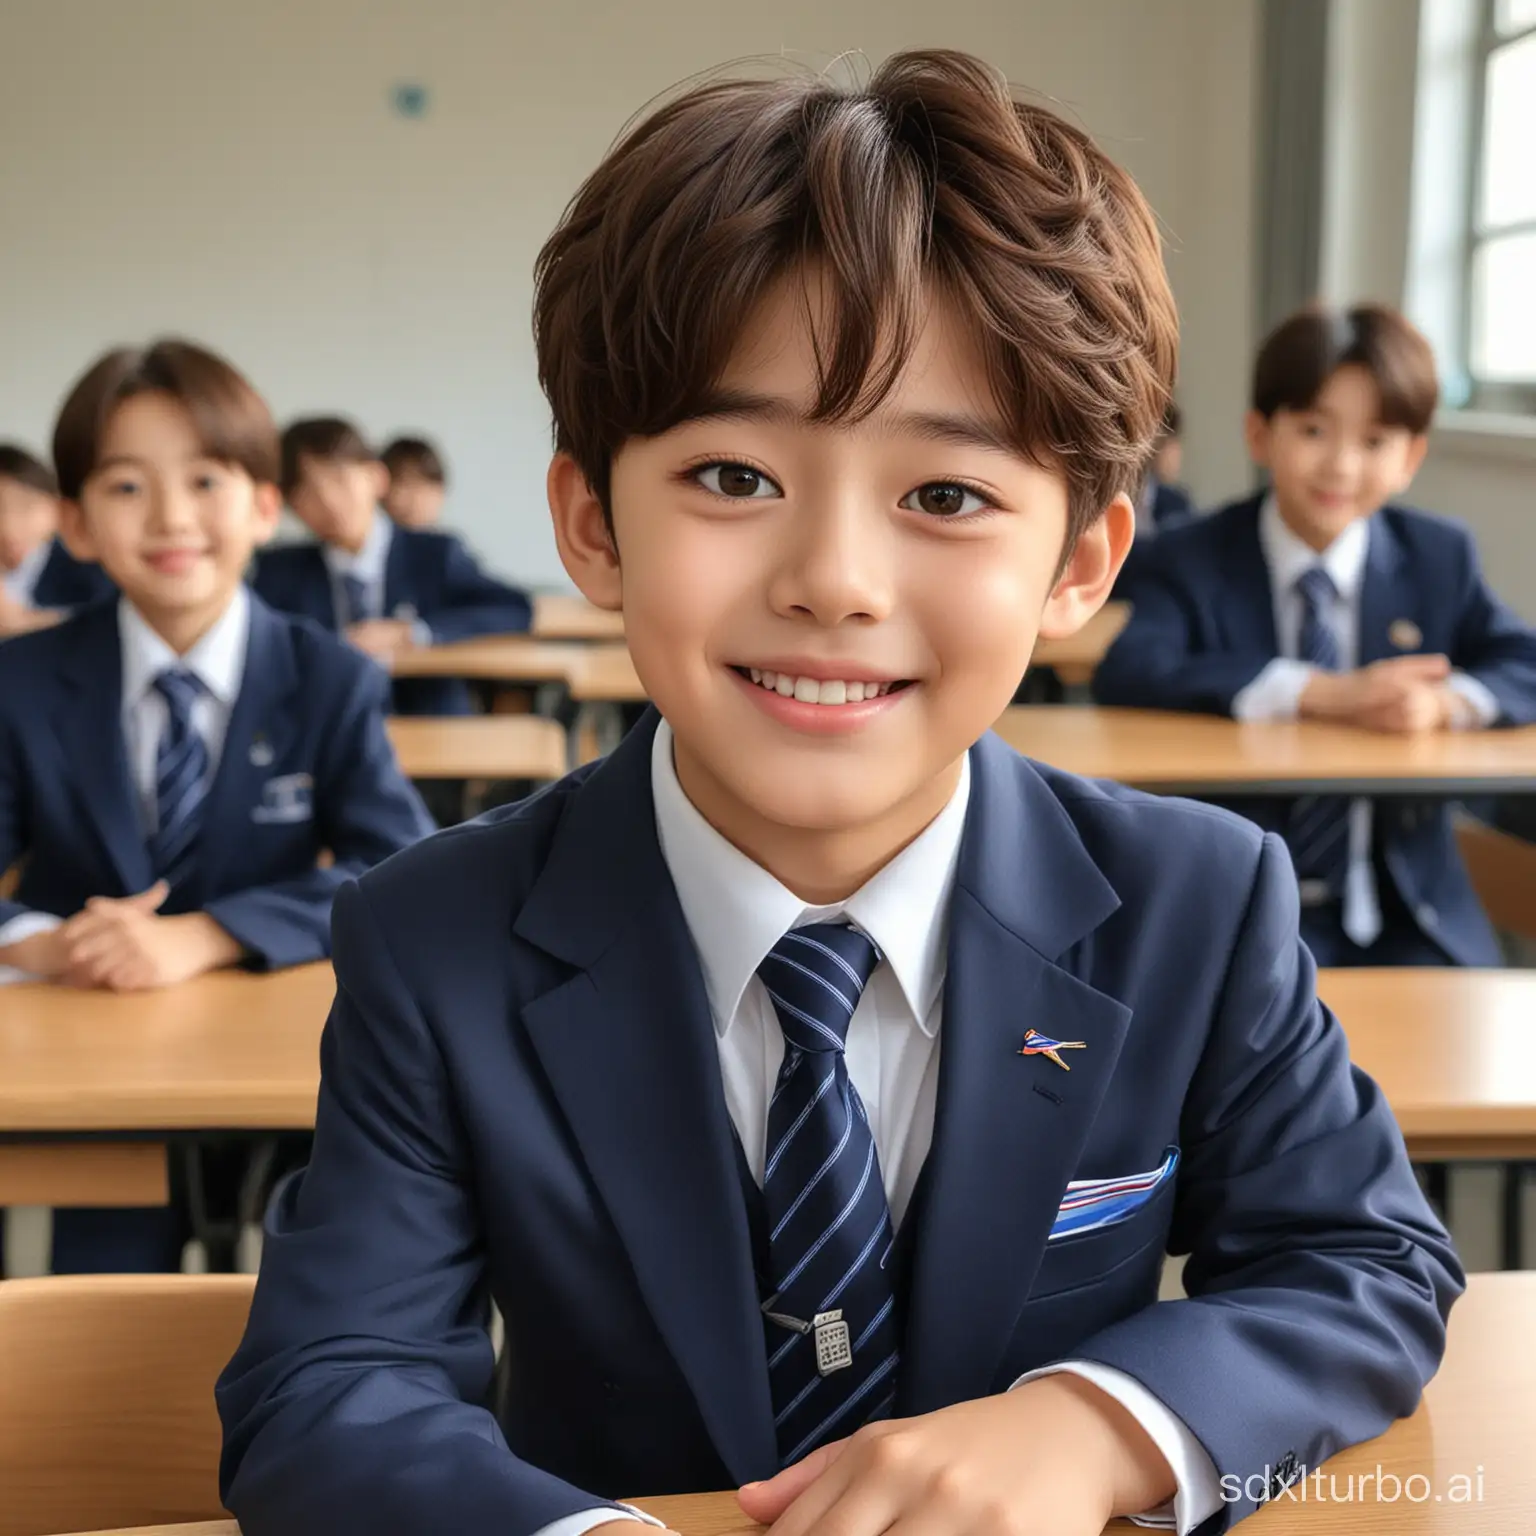 a 7 years old boy, shy and smile, with Cha Eun-woo face, brown hair, a little bit curly, blue eyes ultra detailed illustration of a beautiful boy, he is wearing a dark blue suit tie primary school uniform, he is sitting on a class room, back ground is teacher and other classmates in same uniform.